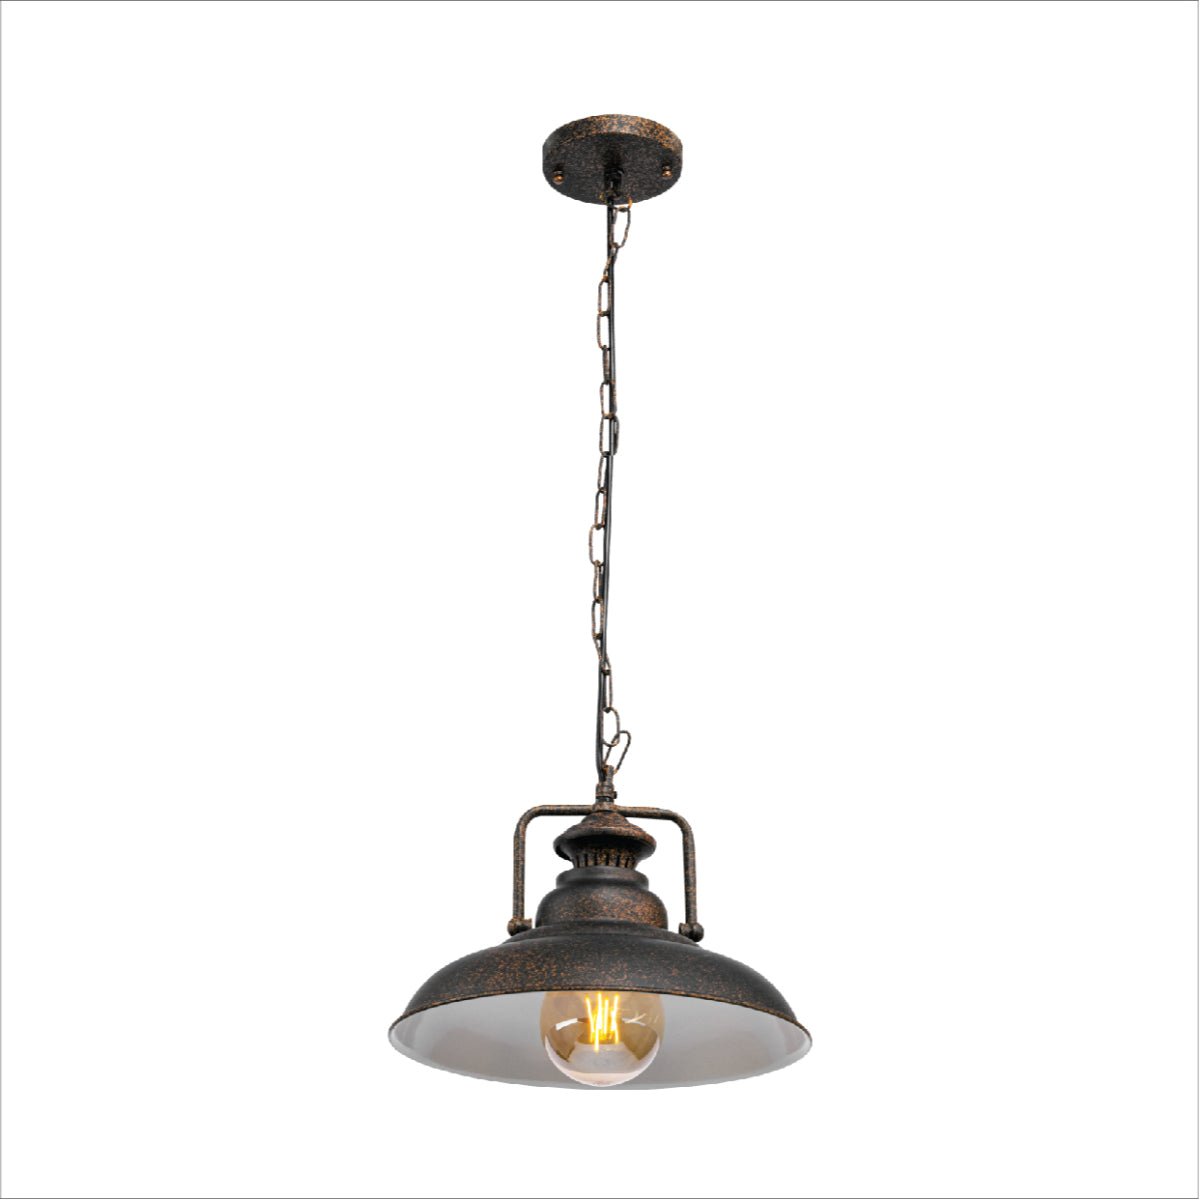 Main image of Rusty Brown Metal Step Pendant Ceiling Light with E27 | TEKLED 150-17932